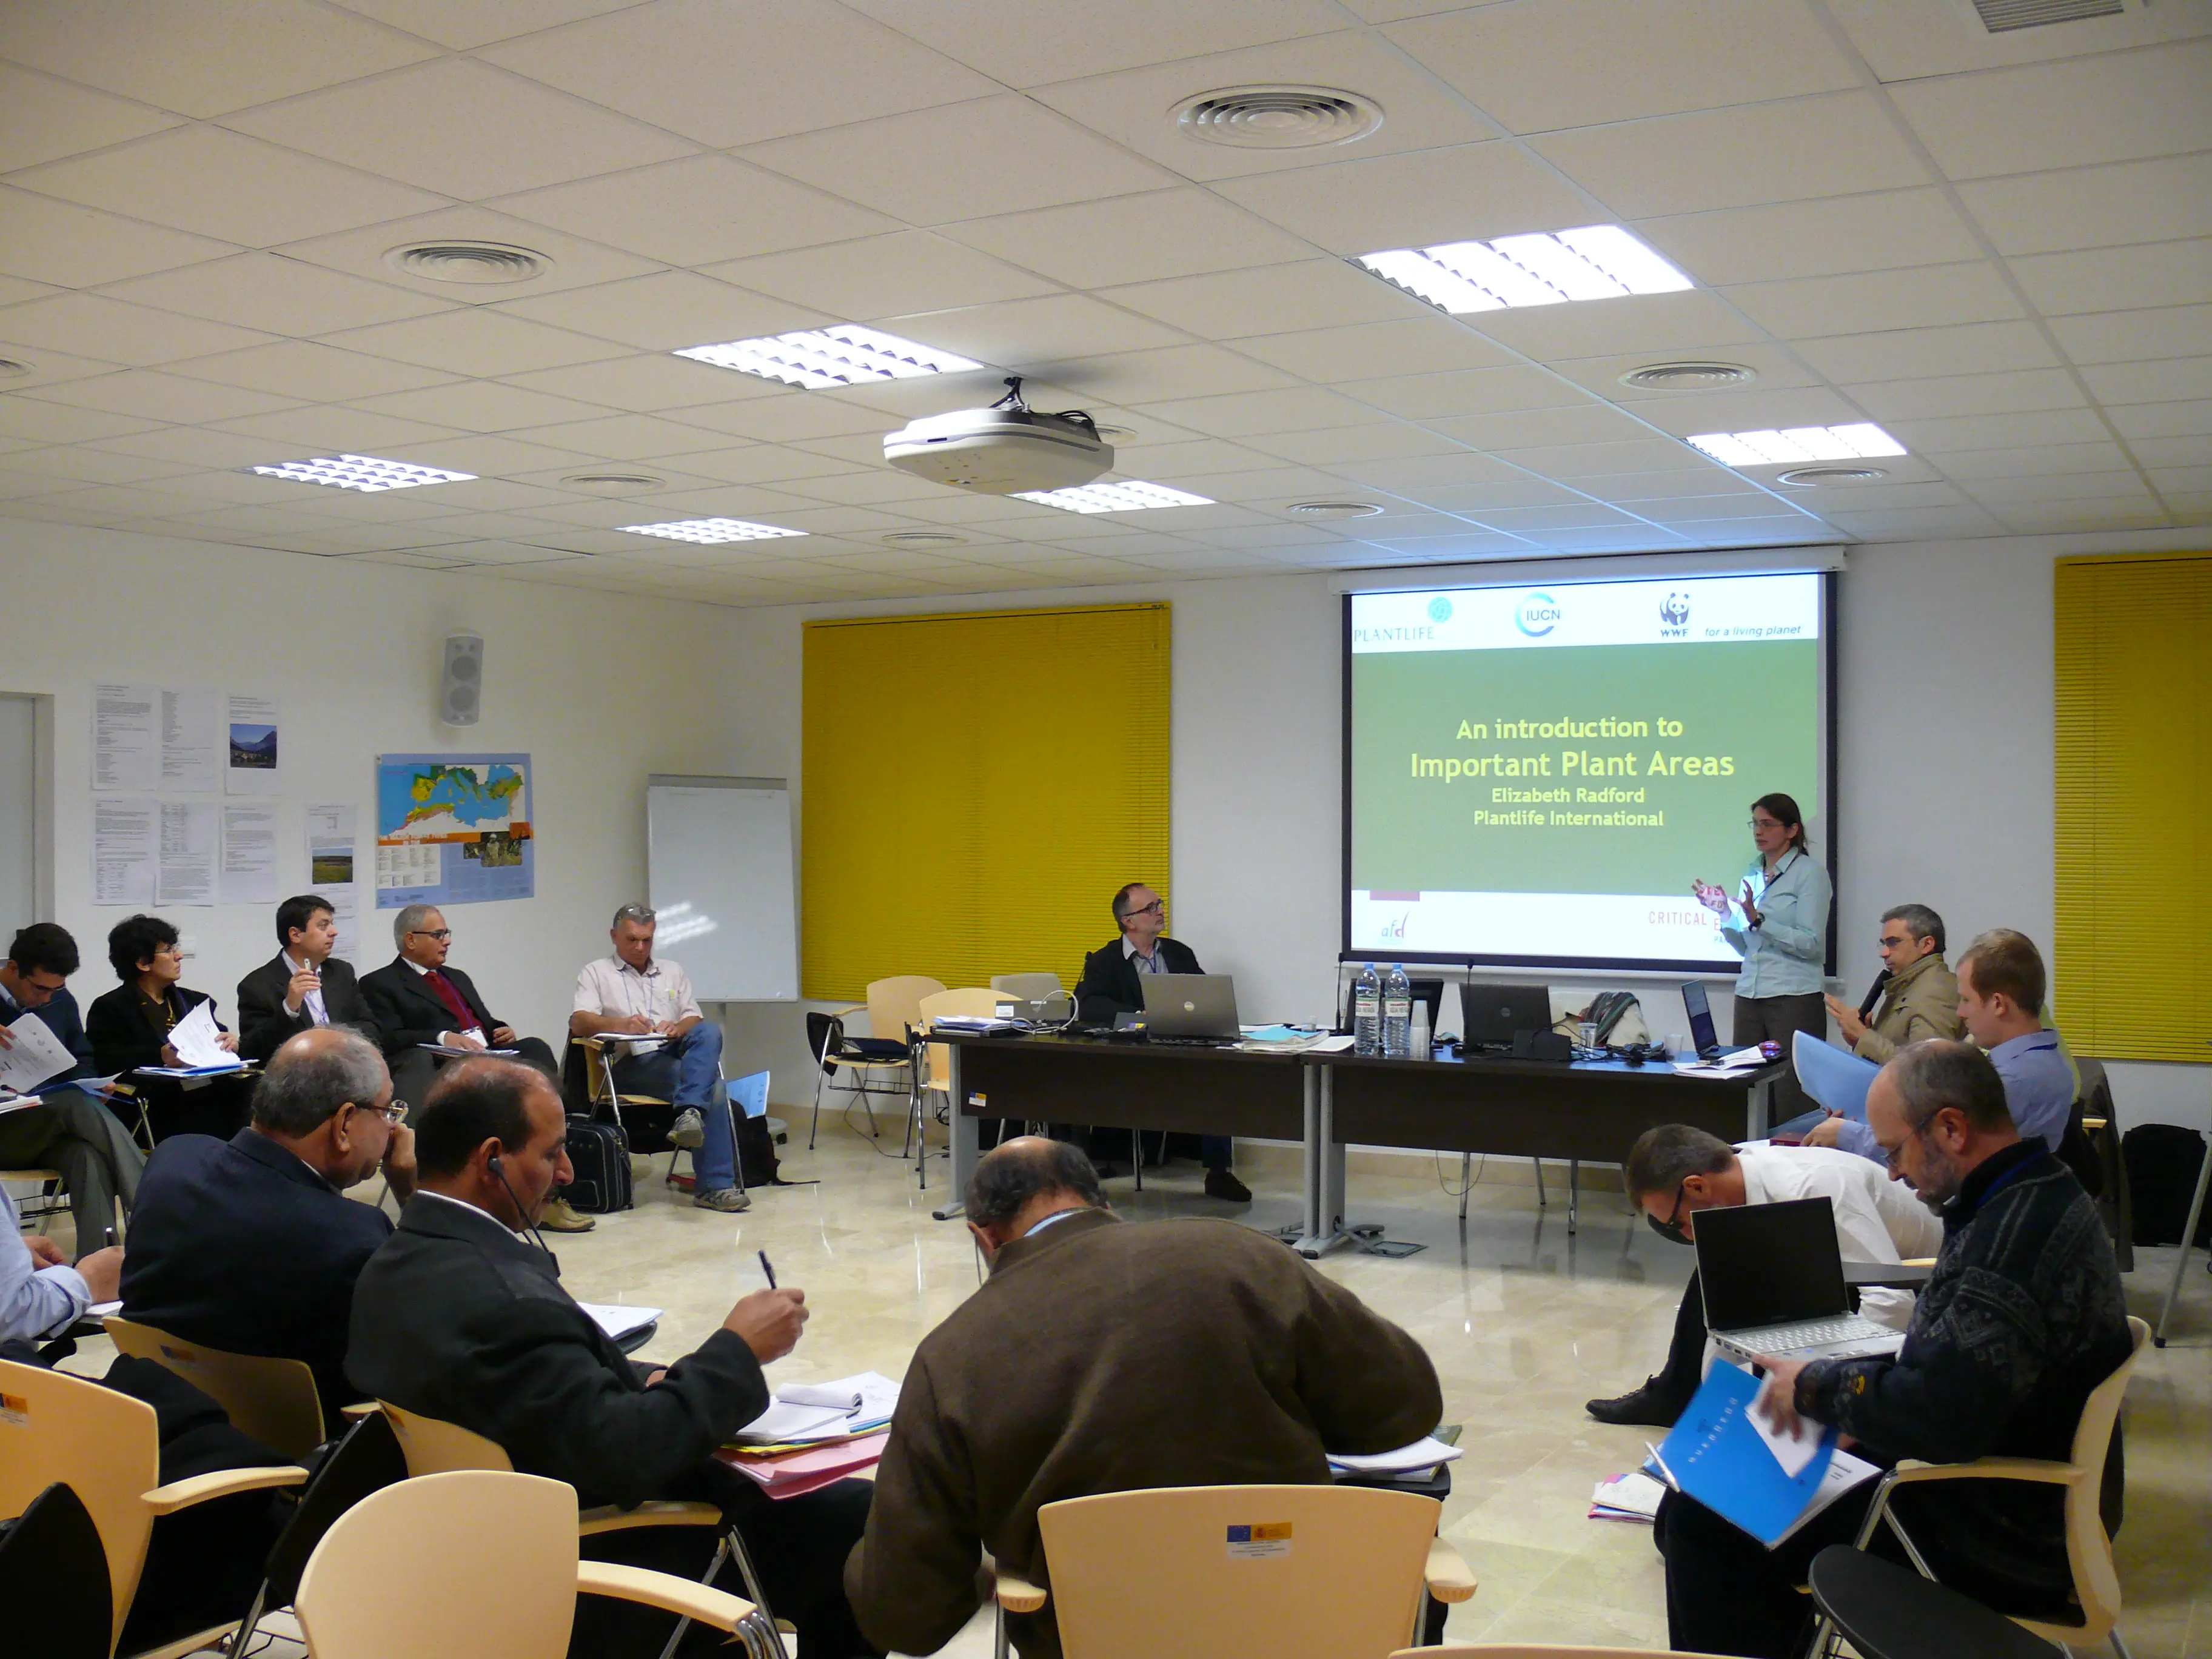 Participants at the IPAs workshop in Malaga - December 2009